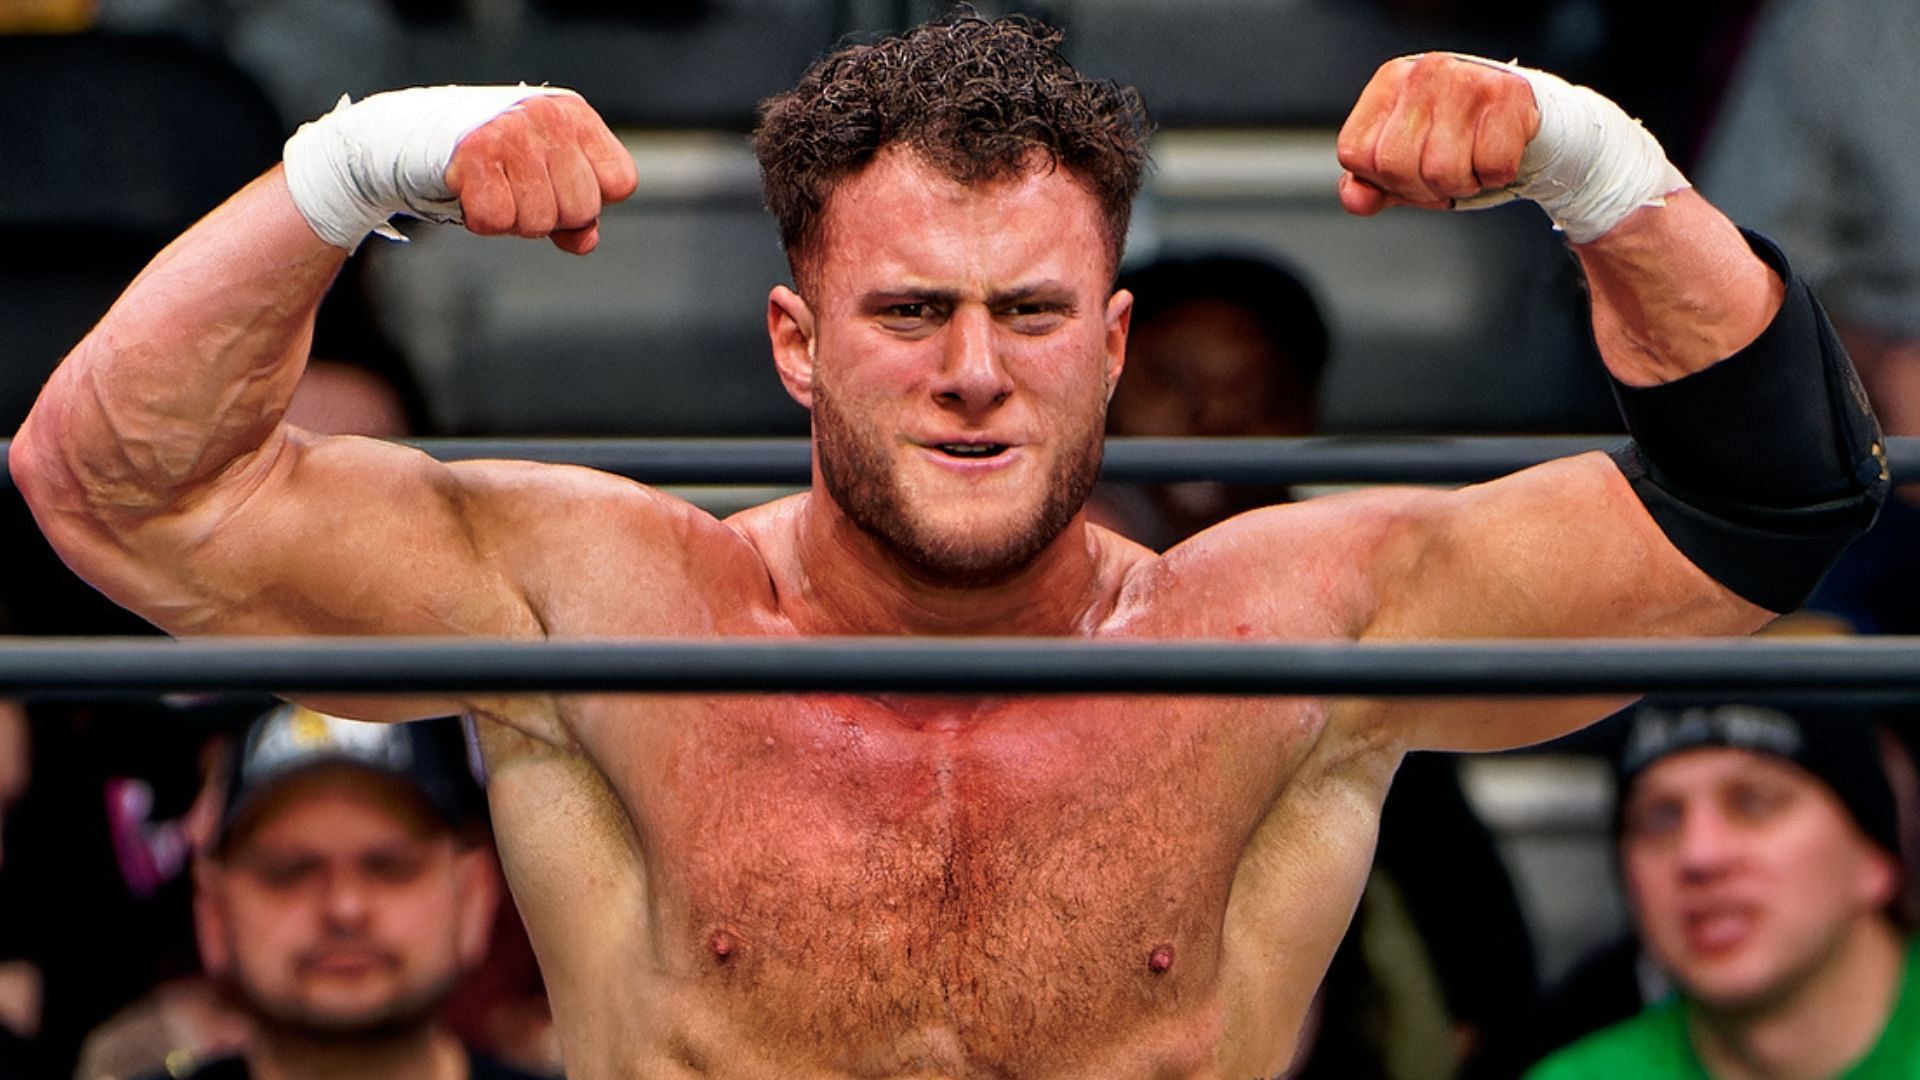 Who else has broken a title record besides MJF?